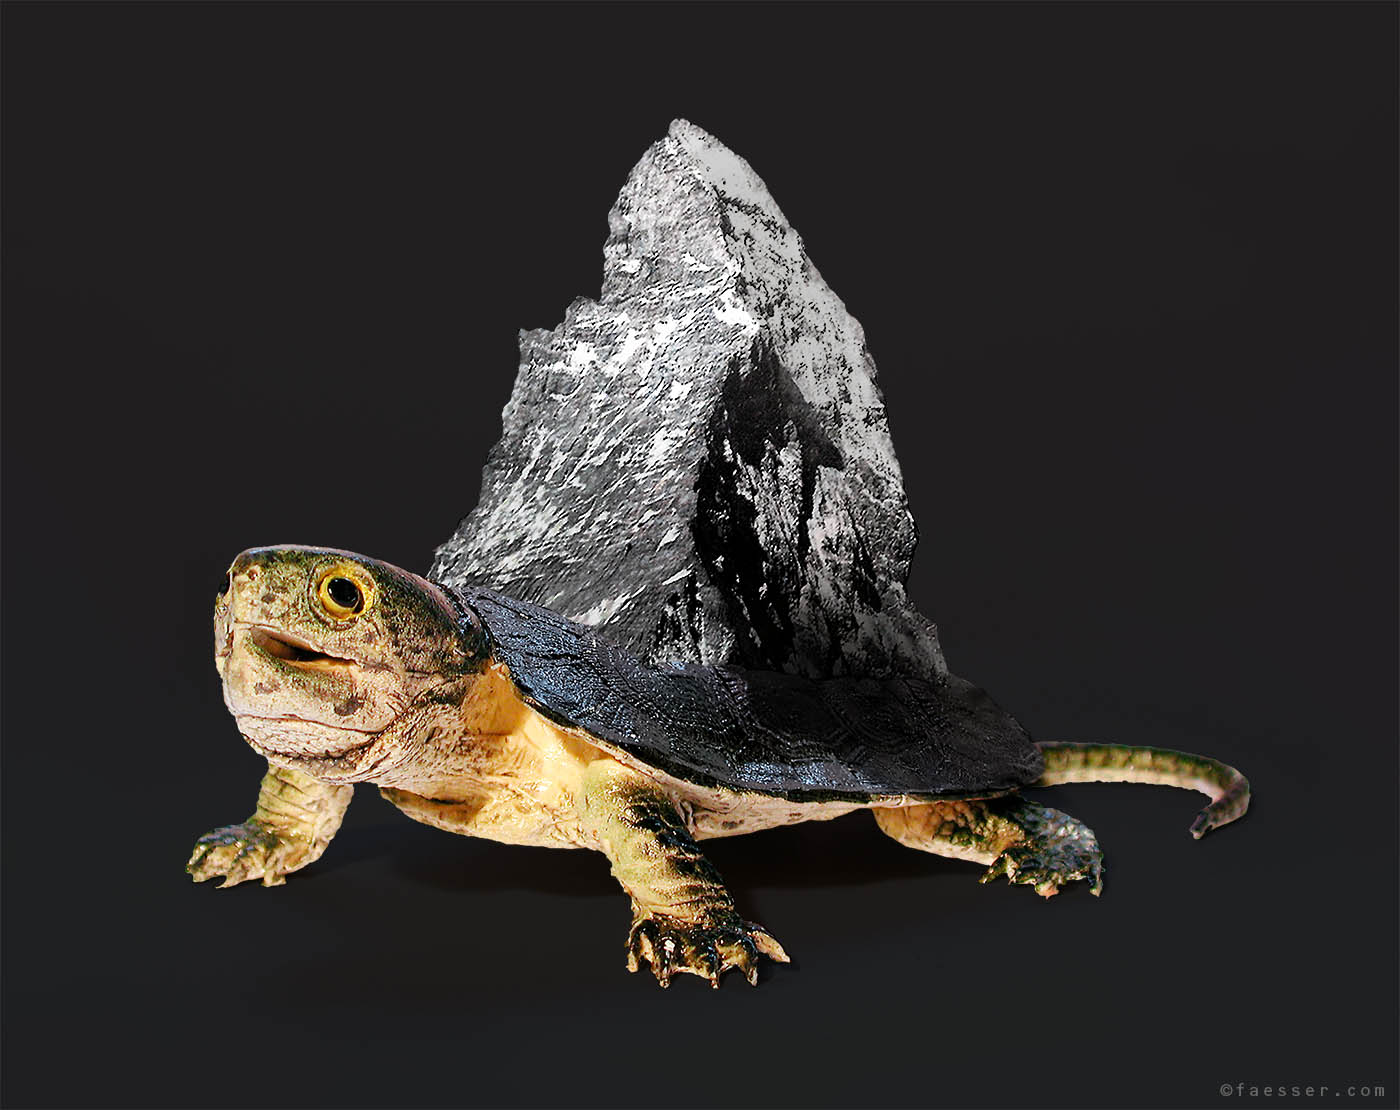 A 3D turtle with the top of the Matterhorn on its shell; artist Roland Faesser, sculptor and digital painter 2022